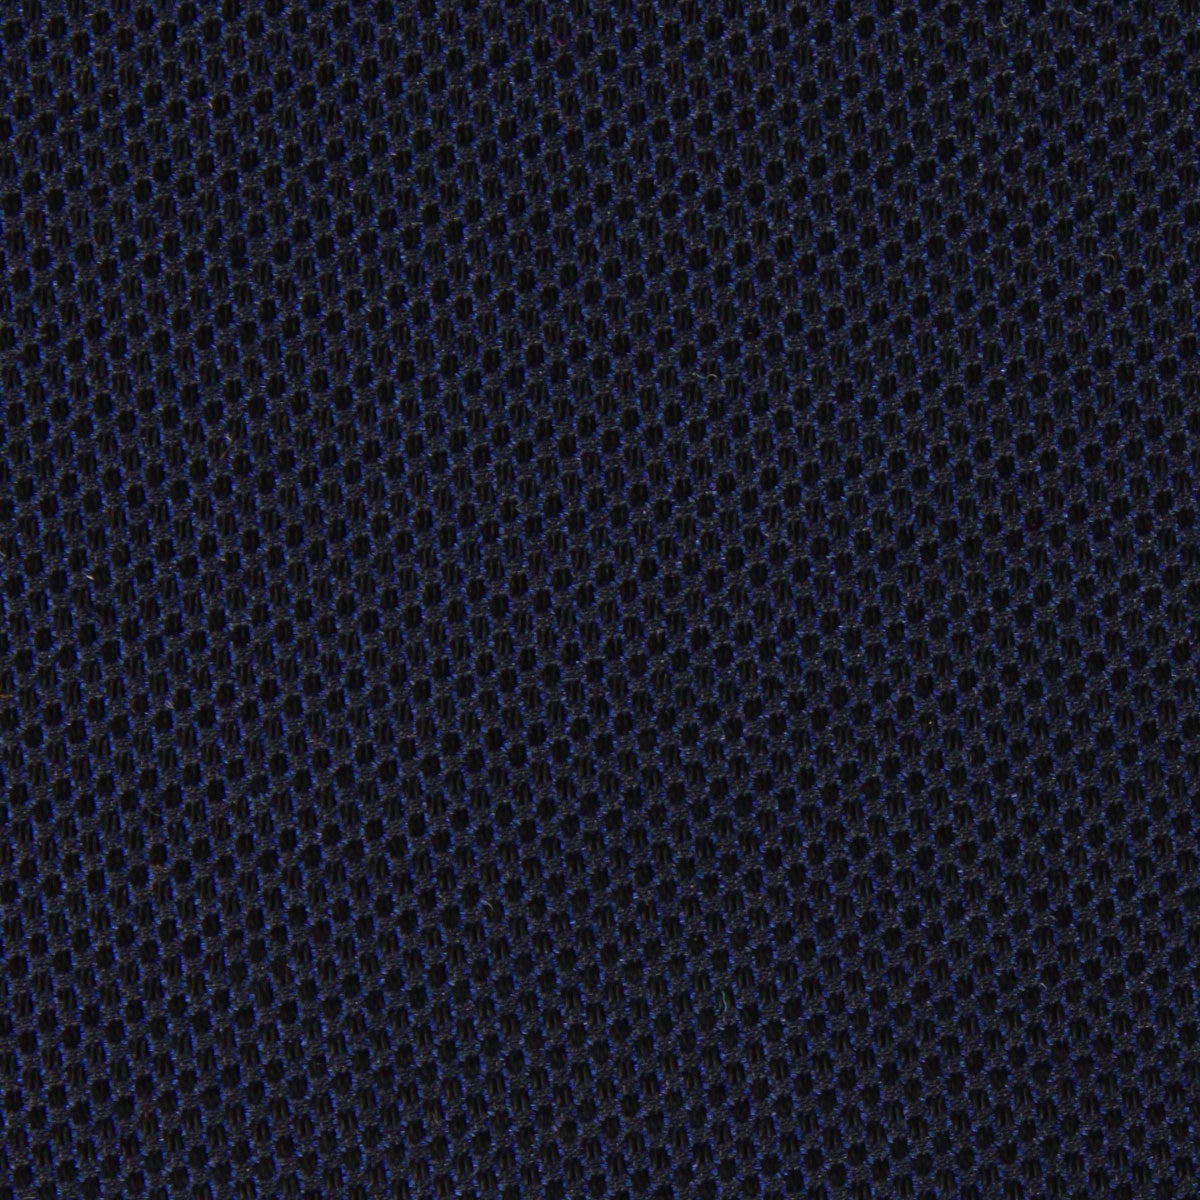 Nude Navy Blue Fabric Pocket Square